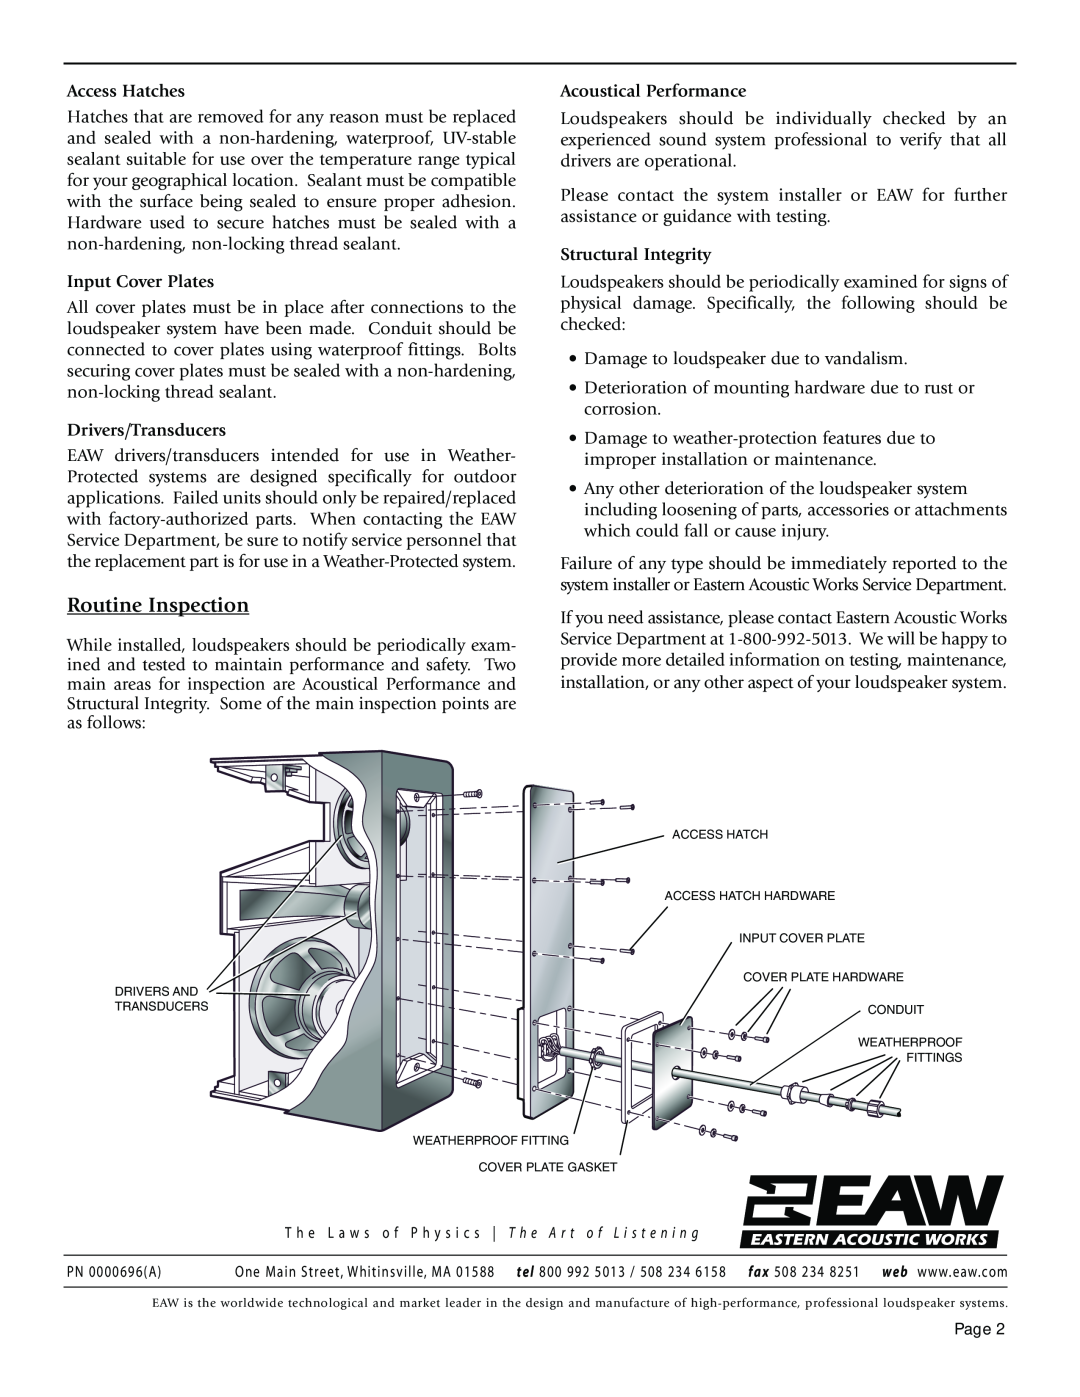 EAW Weather-Protected Loudspeaker System Routine Inspection, Access Hatches, Input Cover Plates, Drivers/Transducers 